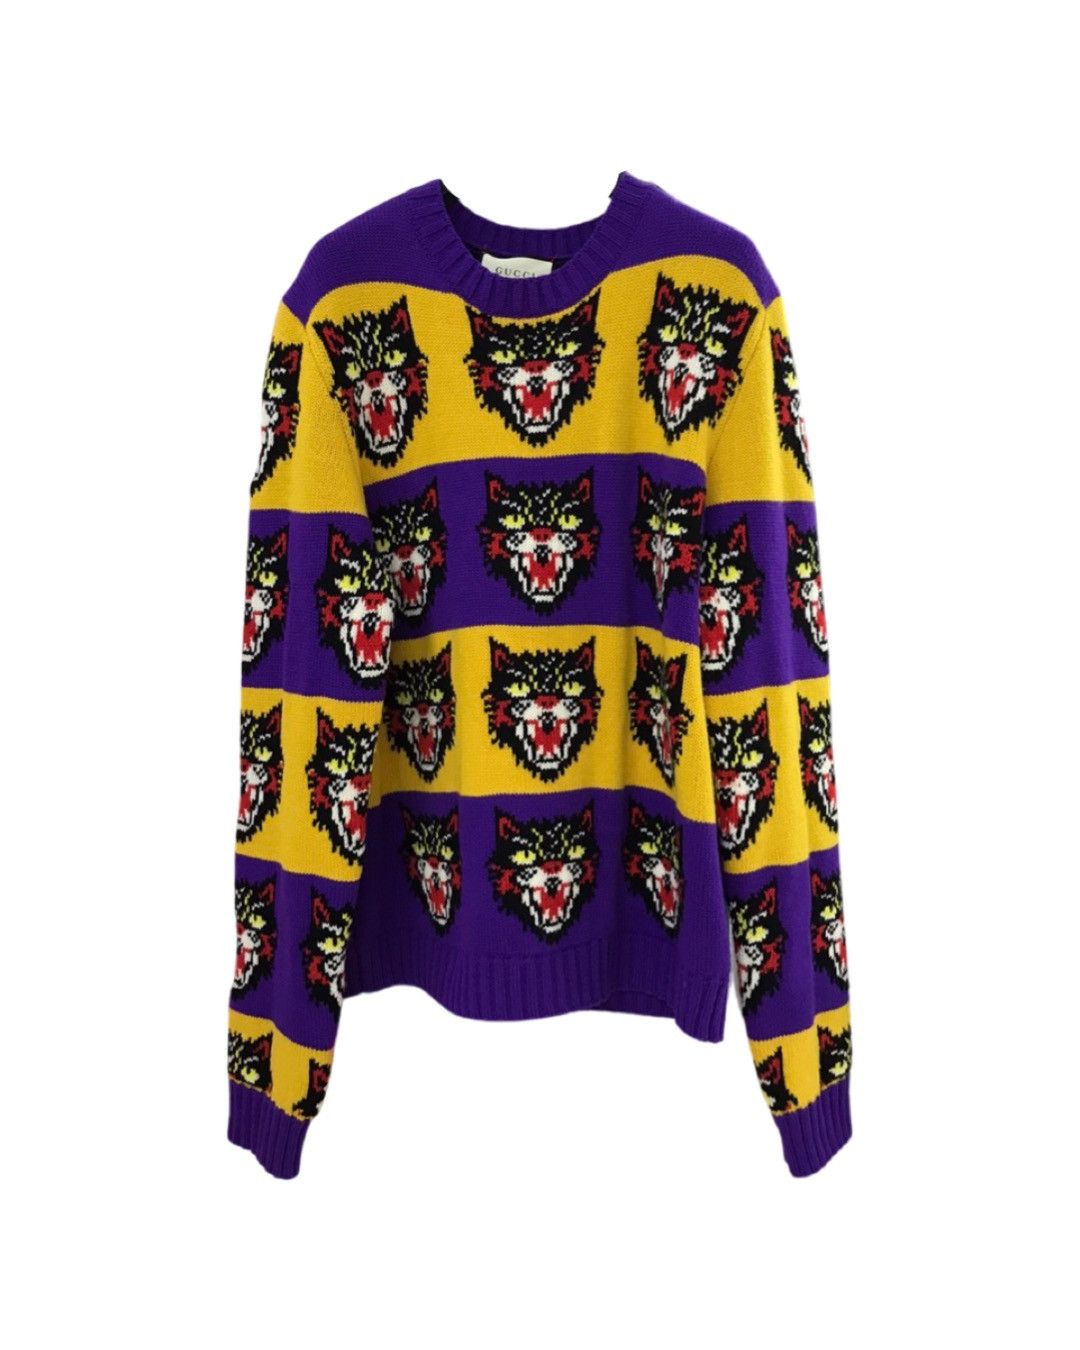 Cat tiger lakers colorway sweater - 1